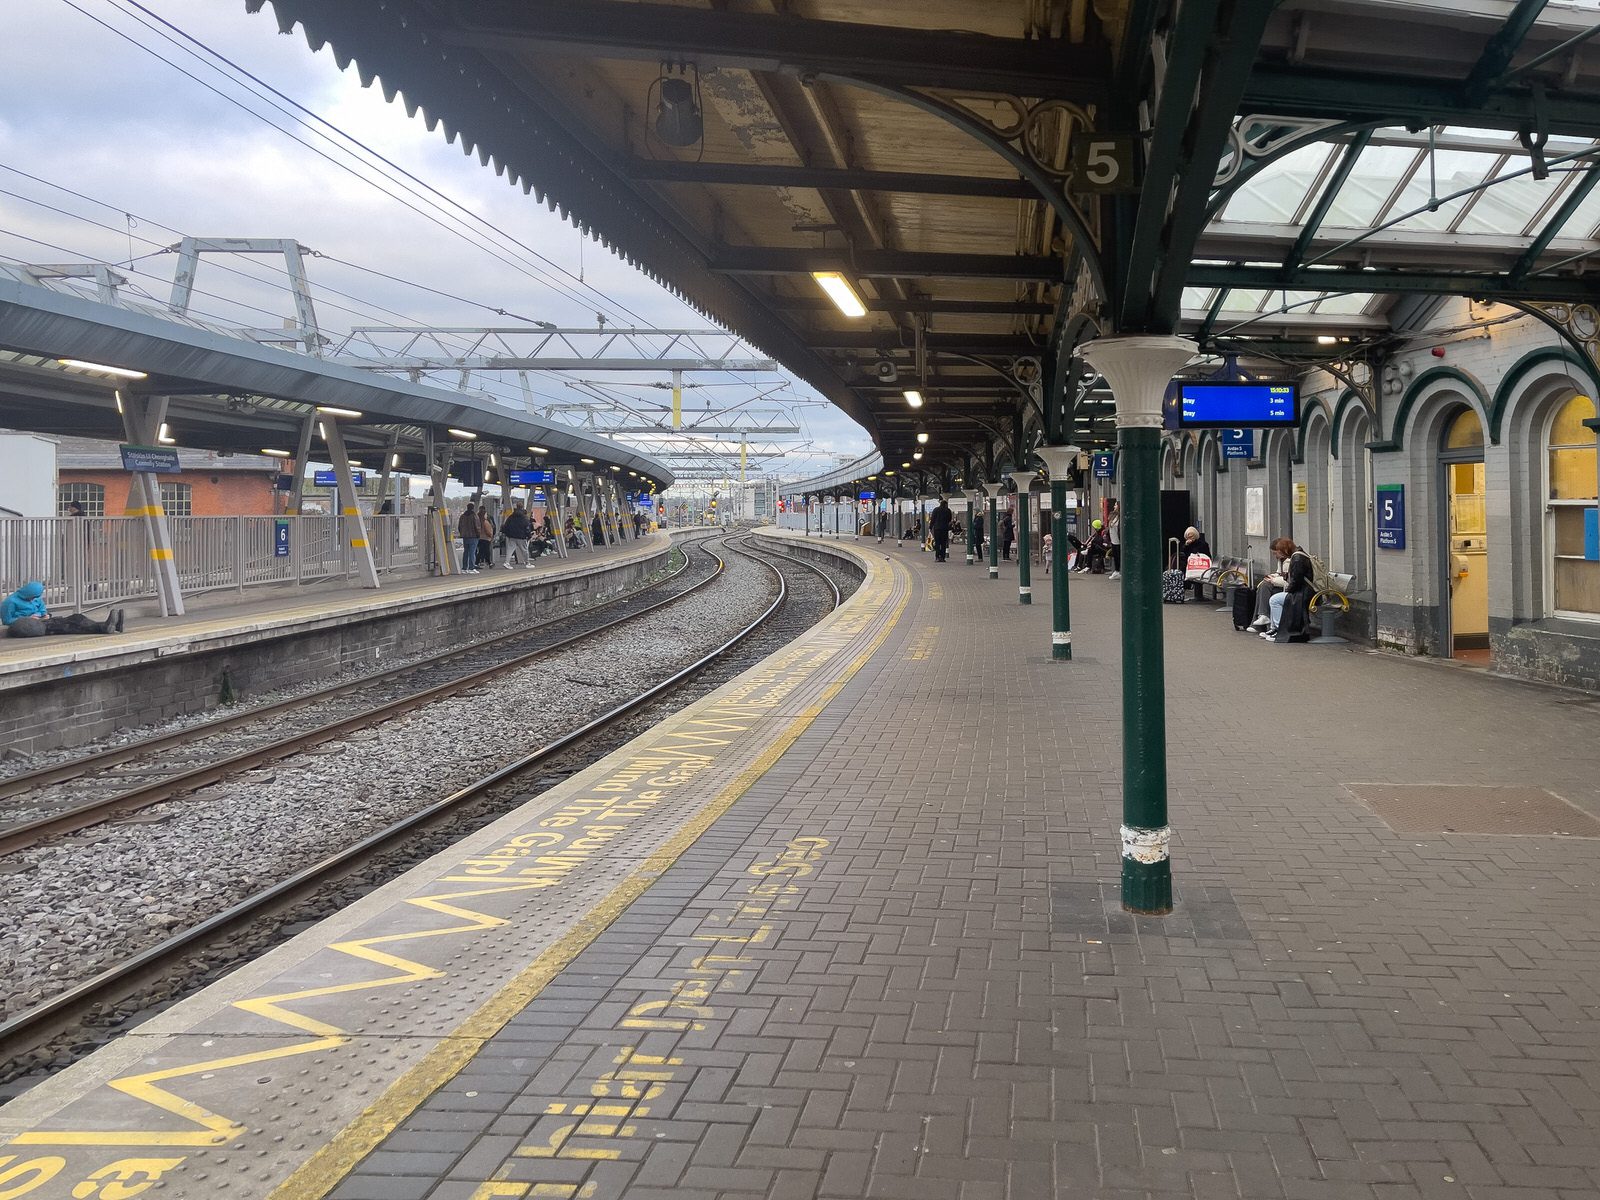 AS THE BUS AND TRAM SERVICES WERE SUSPENDED IN THE CITY CENTRE [I WENT TO CONNOLLY STATION AND TRAVELLED BY DART]-225397-1